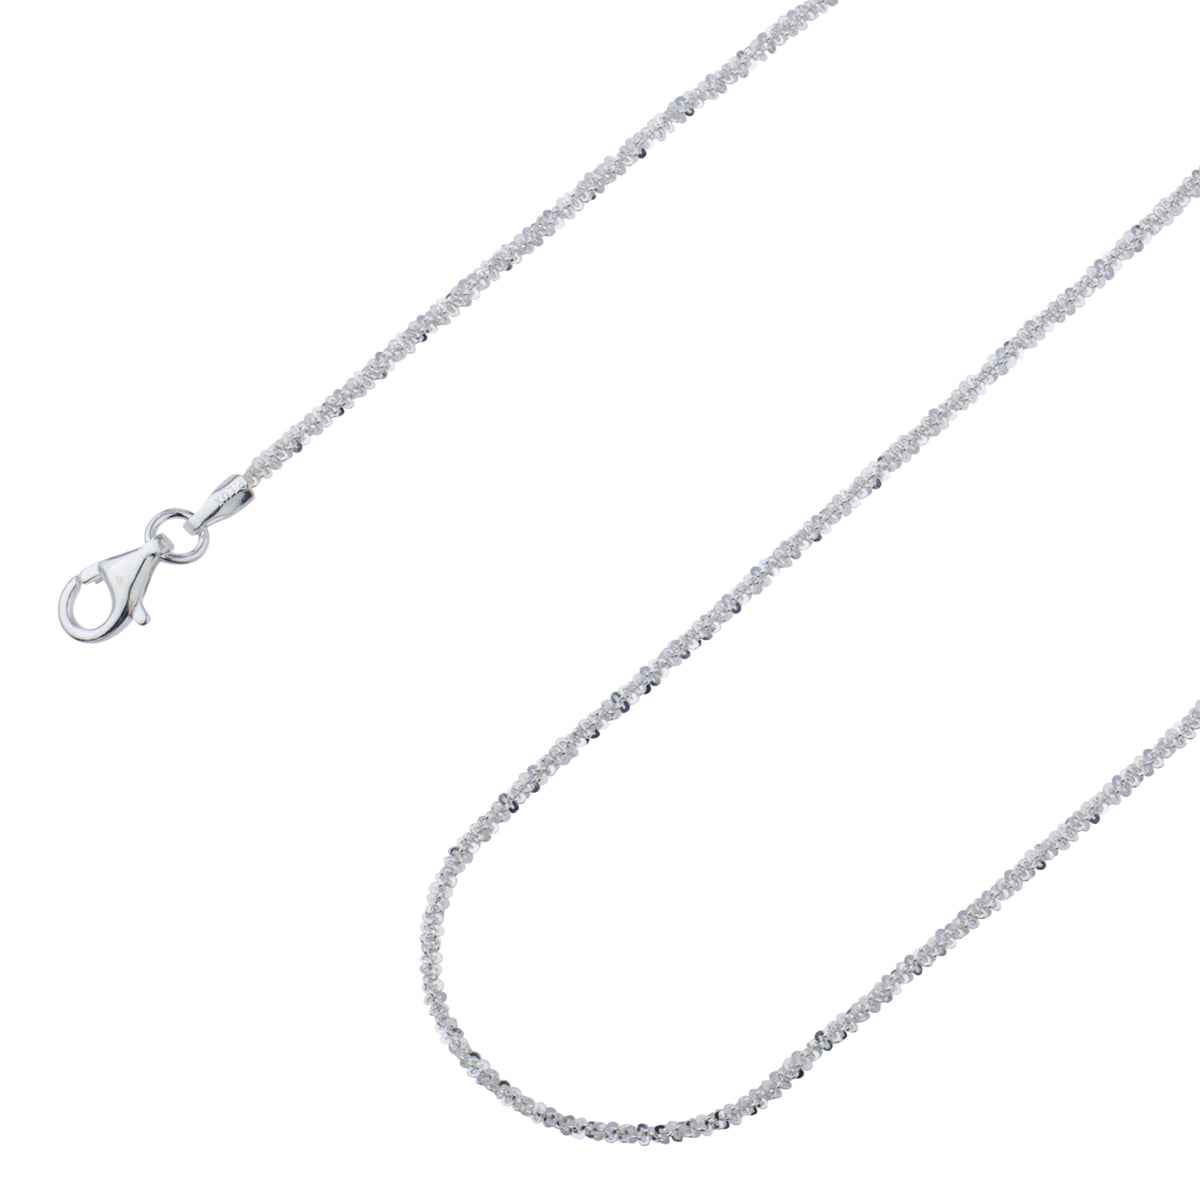 925 Sterling Silver 2.5mm Twisted Margarita Rock Chain